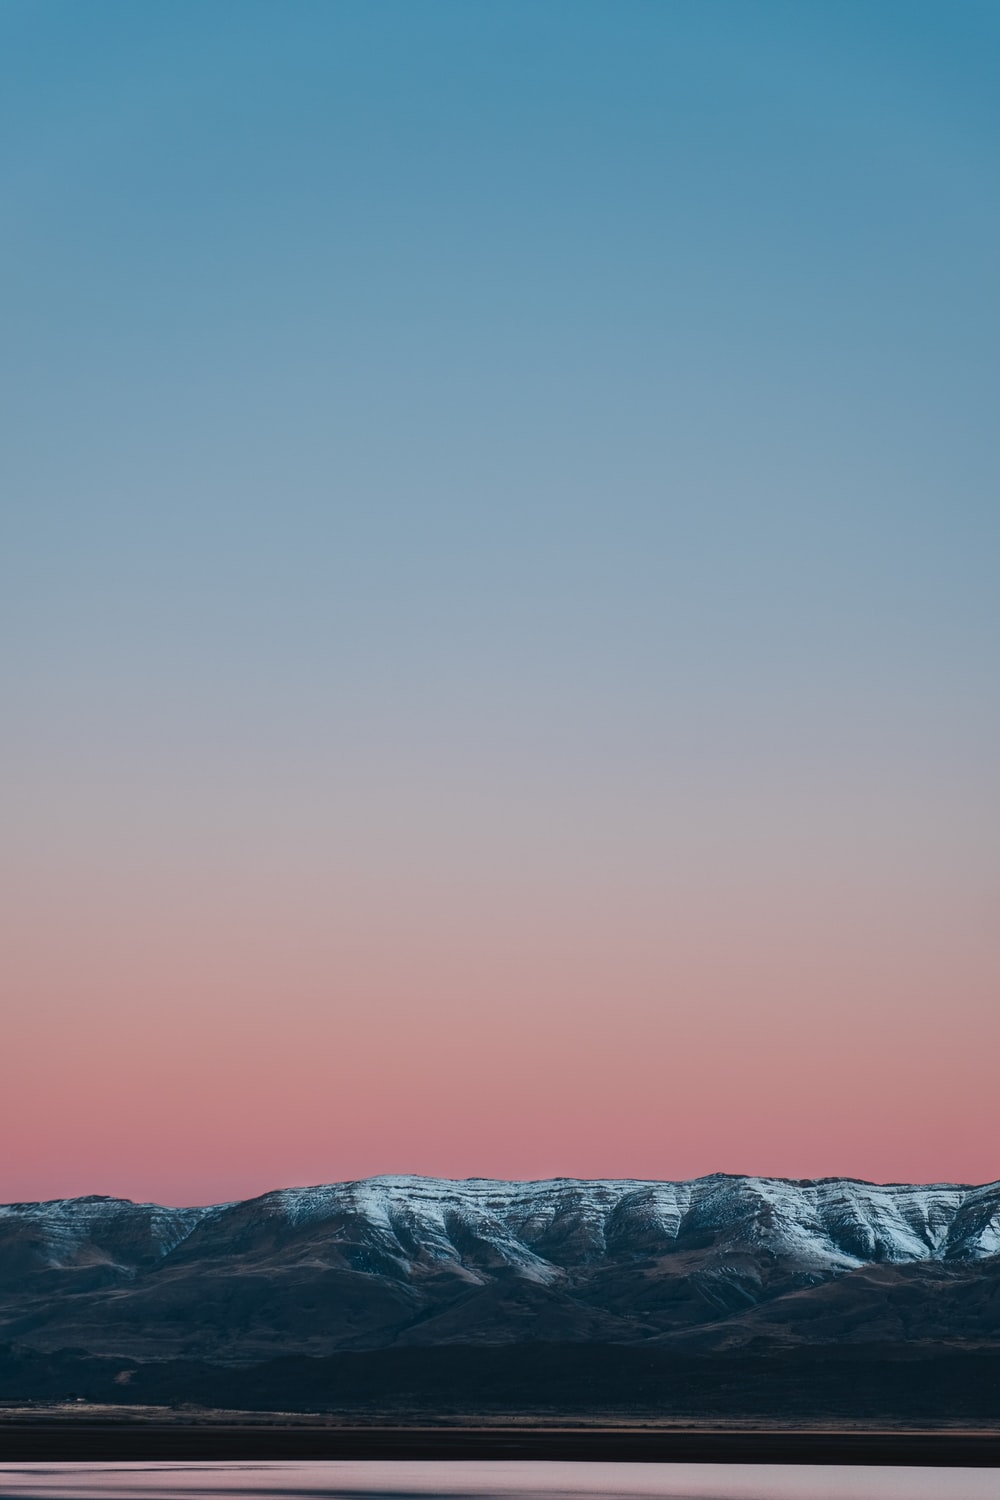 Phone Wallpaper. best free wallpaper, grey, outdoor and car photo